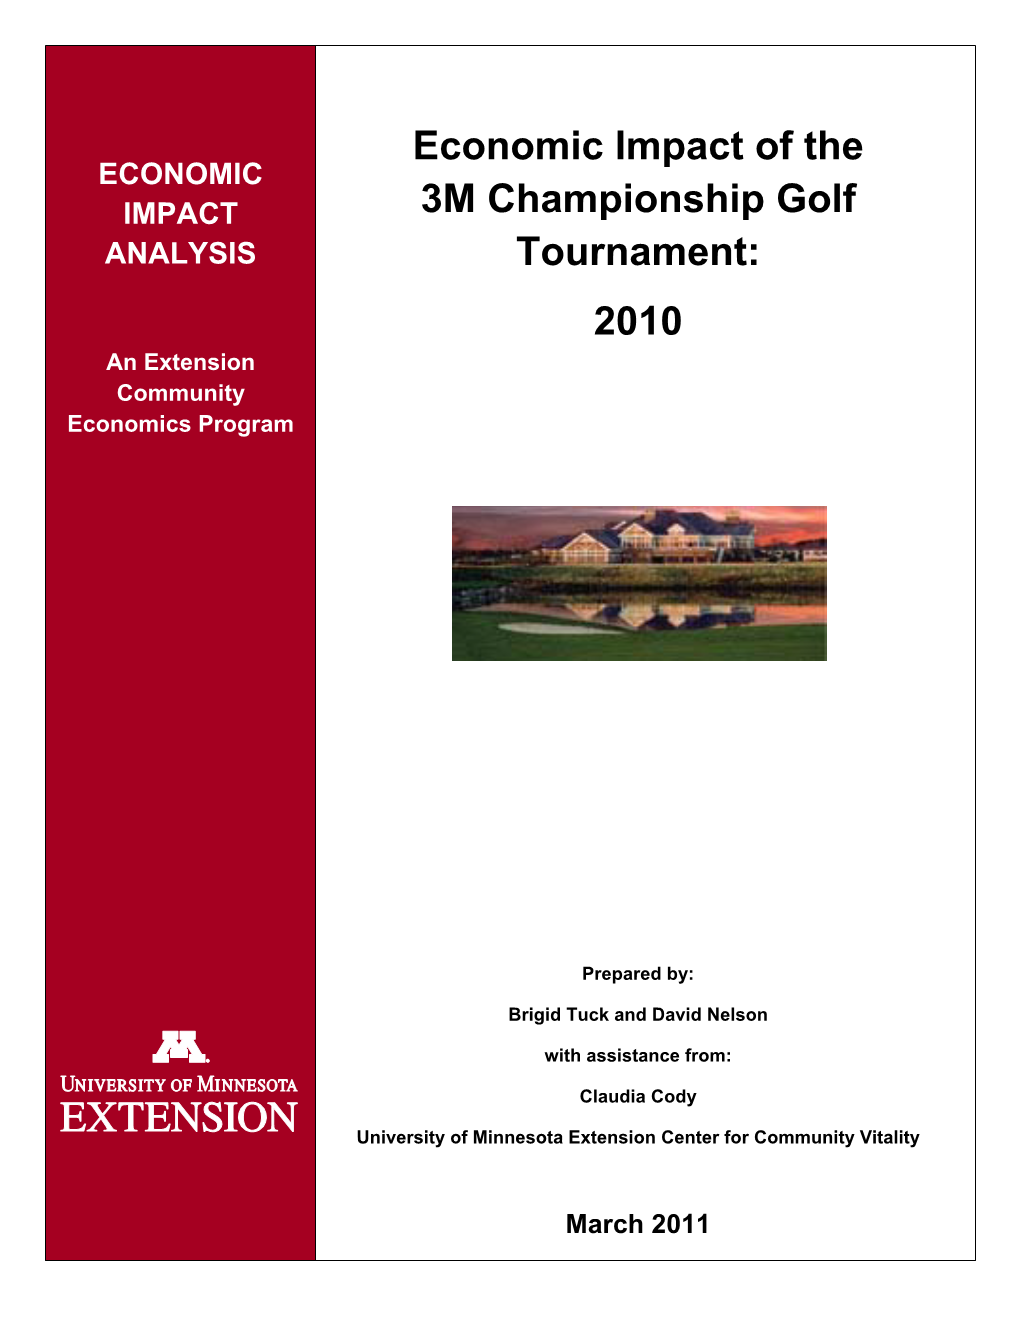 Economic Impact of the 3M Championship Golf Tournament: 2010 Table of Contents